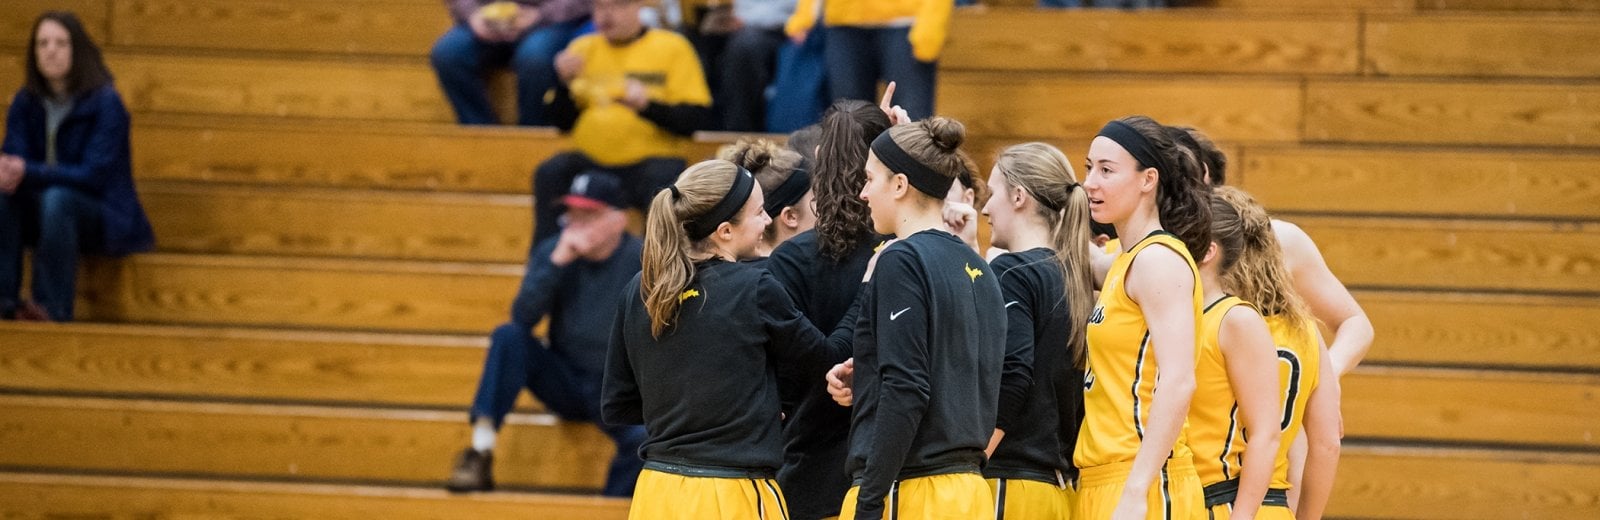 The Michigan Tech Women's Basketball Team is one of two Great Lakes Intercollegiate Athletic teams (GLIAC) ranked in the top 25 this week.